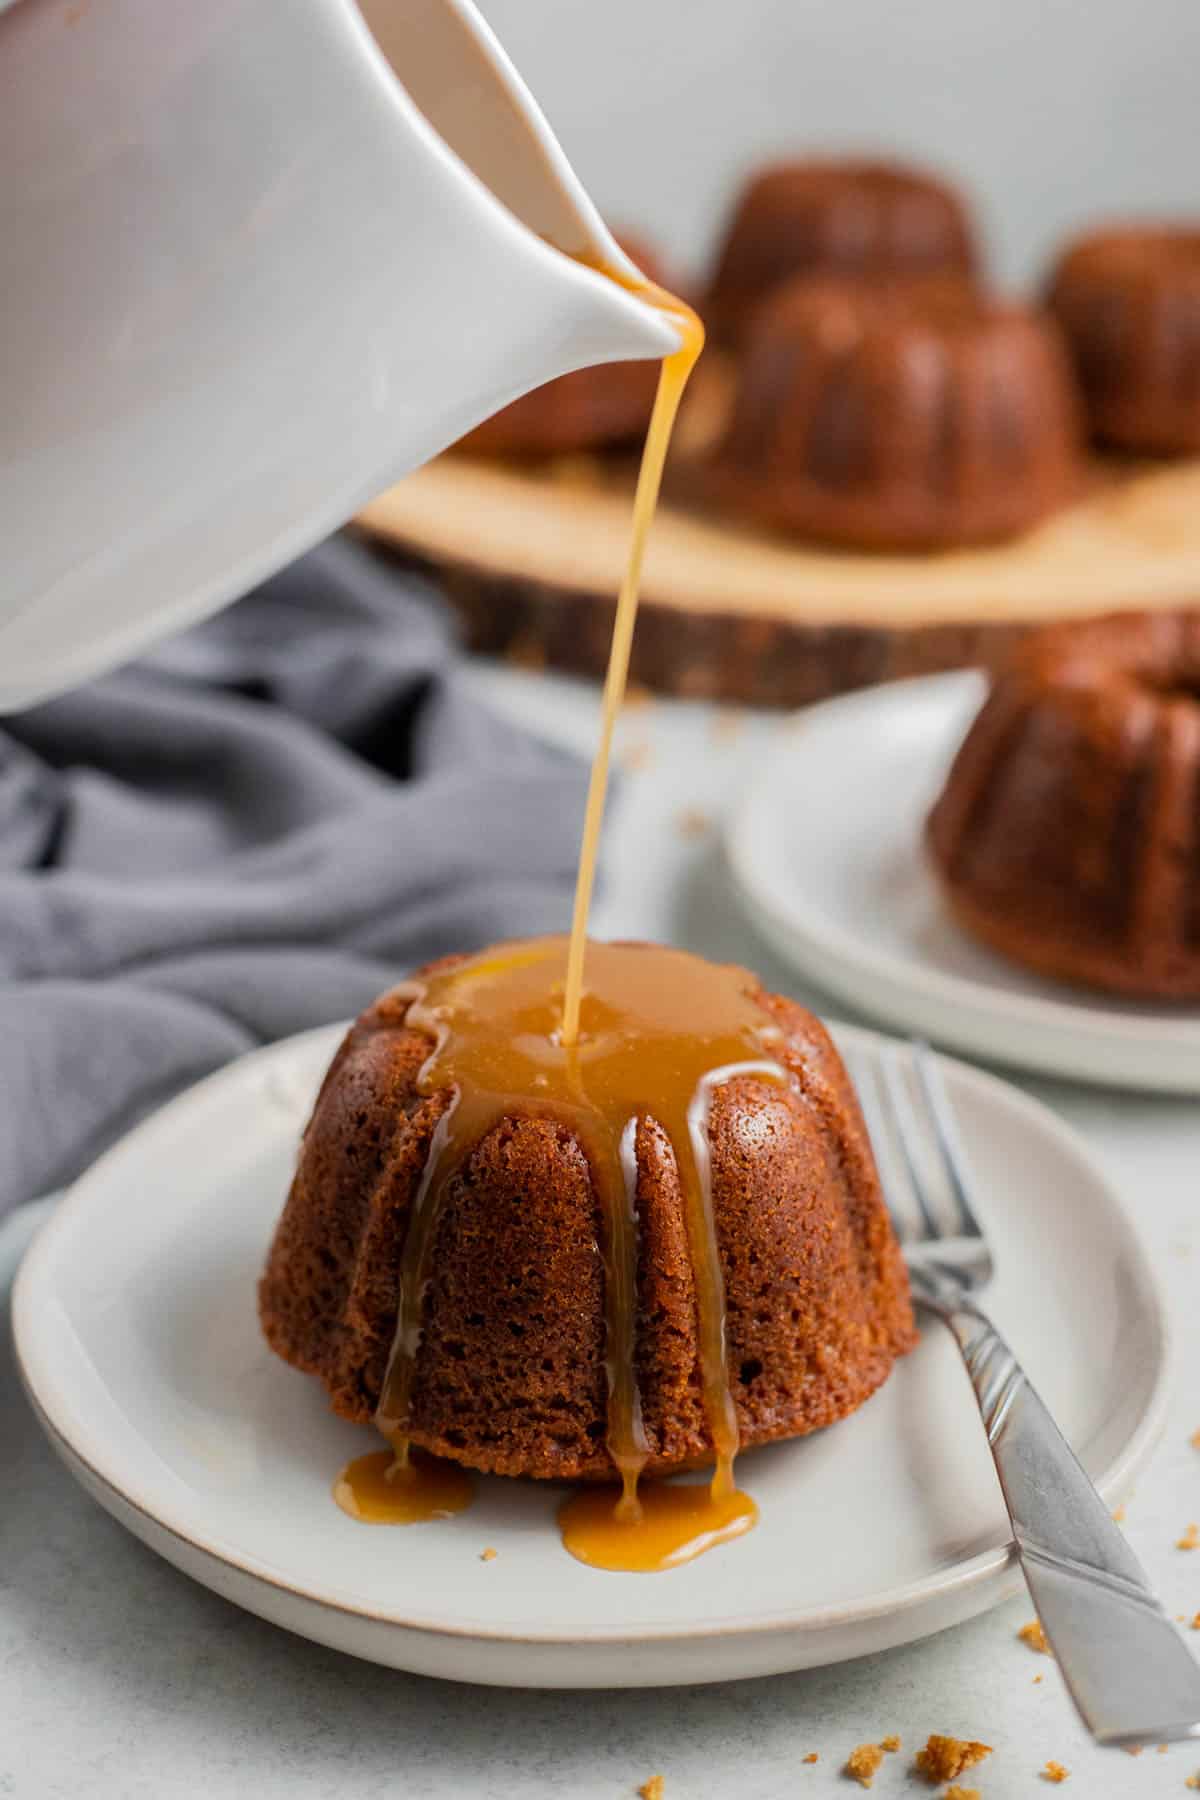 Caramel sauce pouring on top of a pudding.